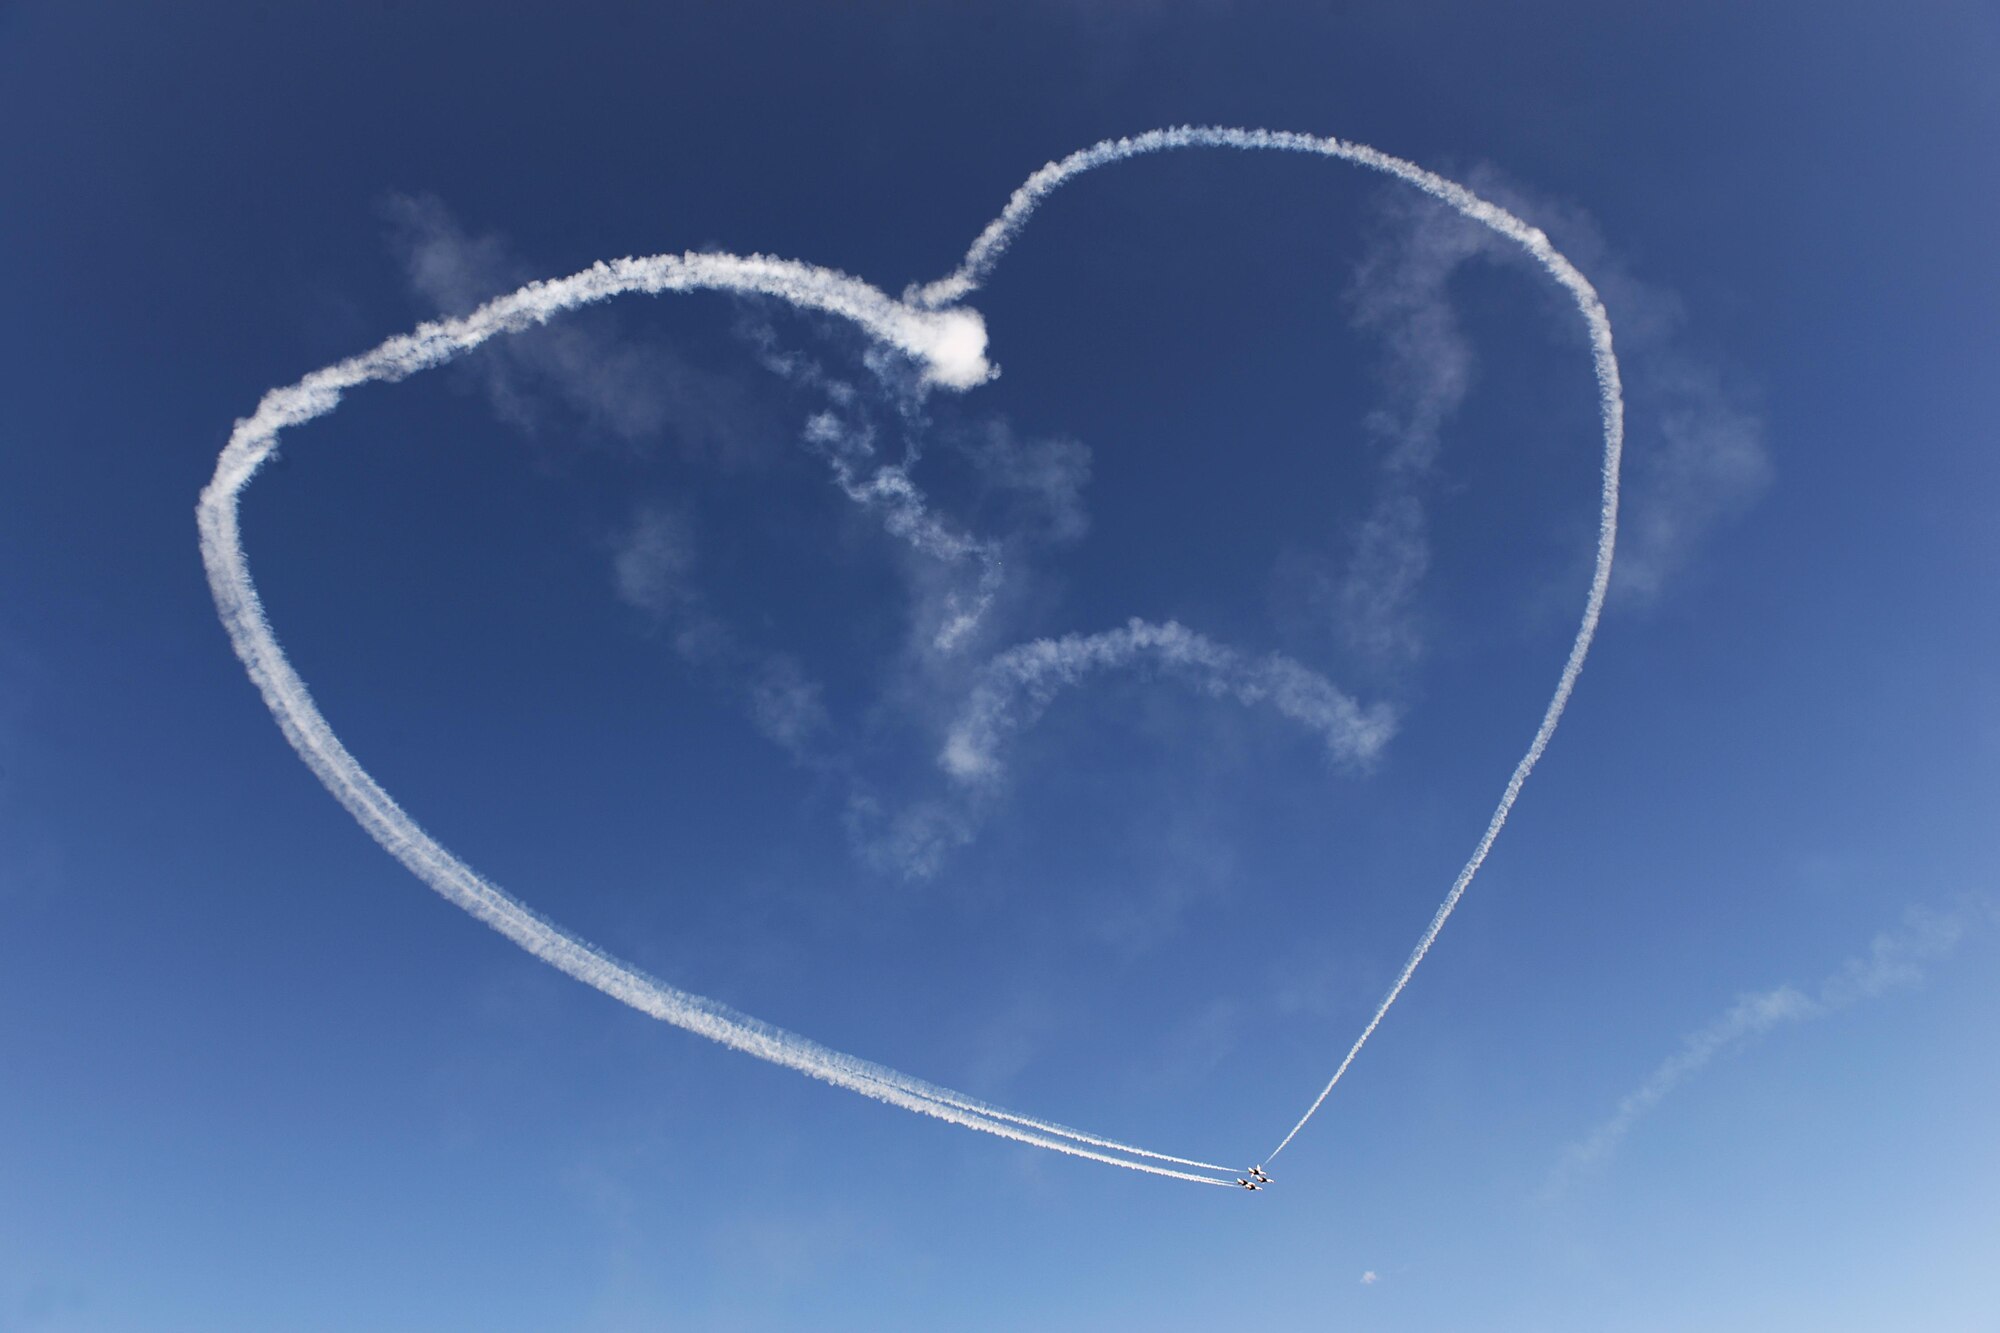 The U.S. Air Force Thunderbirds form a heart for deployed Airmen and their families during the Sheppard Air Force Base, Texas, 75th Anniversary Air Show, Sept. 17, 2016. Since 1953, the Thunderbirds have performed for millions of people across the United States, spreading the word about the U.S. Air Force and its precision, skill and decisive combat power. (U.S. Air Force photo by Senior Airman Kyle E. Gese)